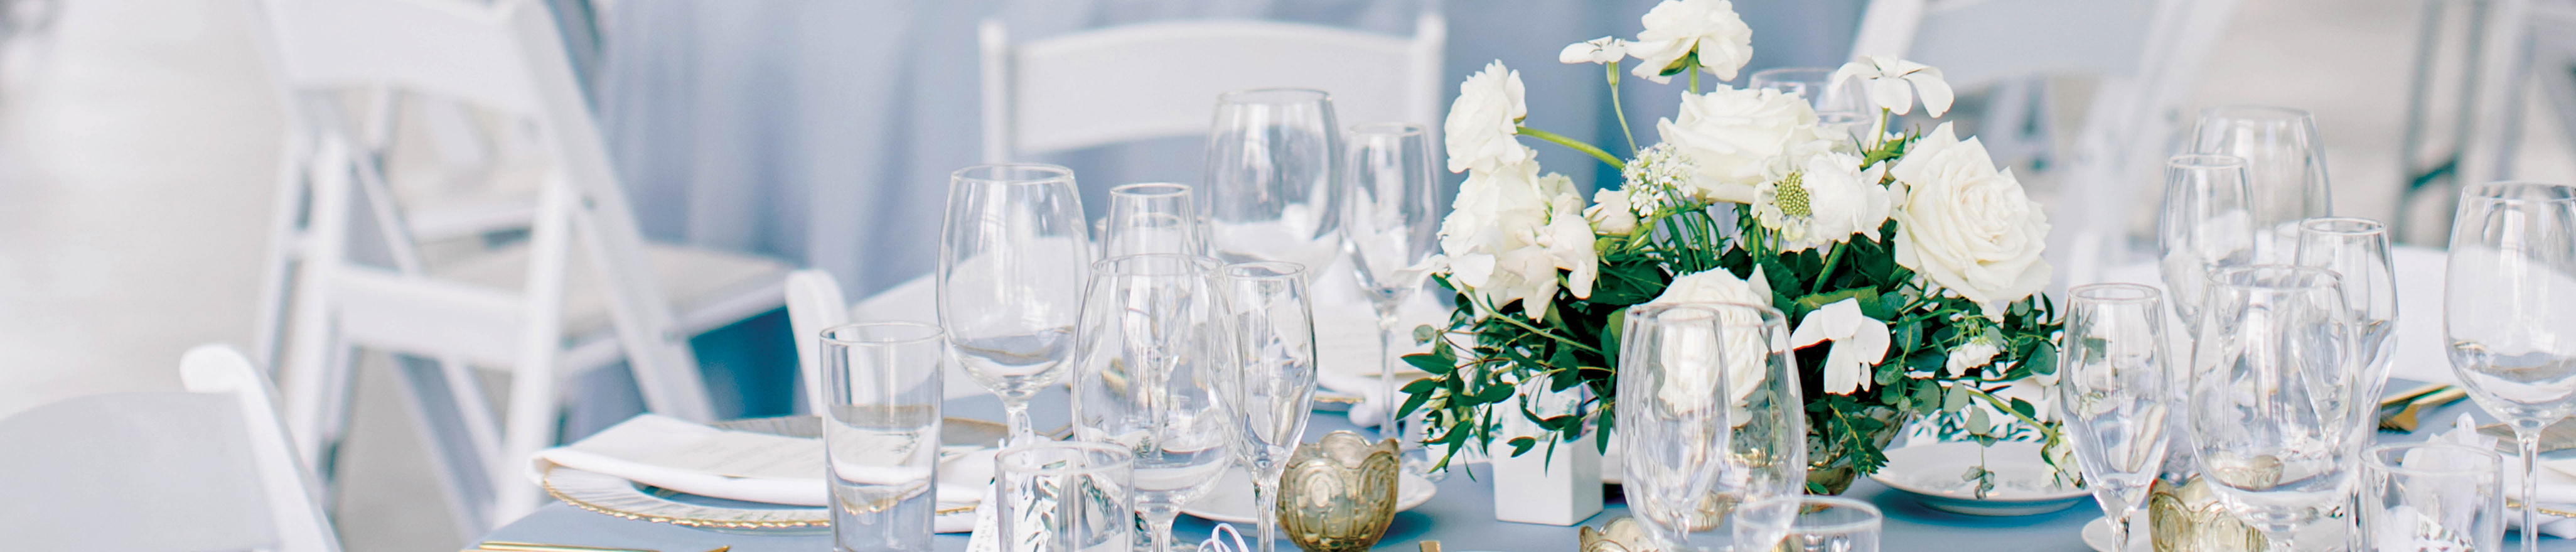 Tablescape trends – InTents